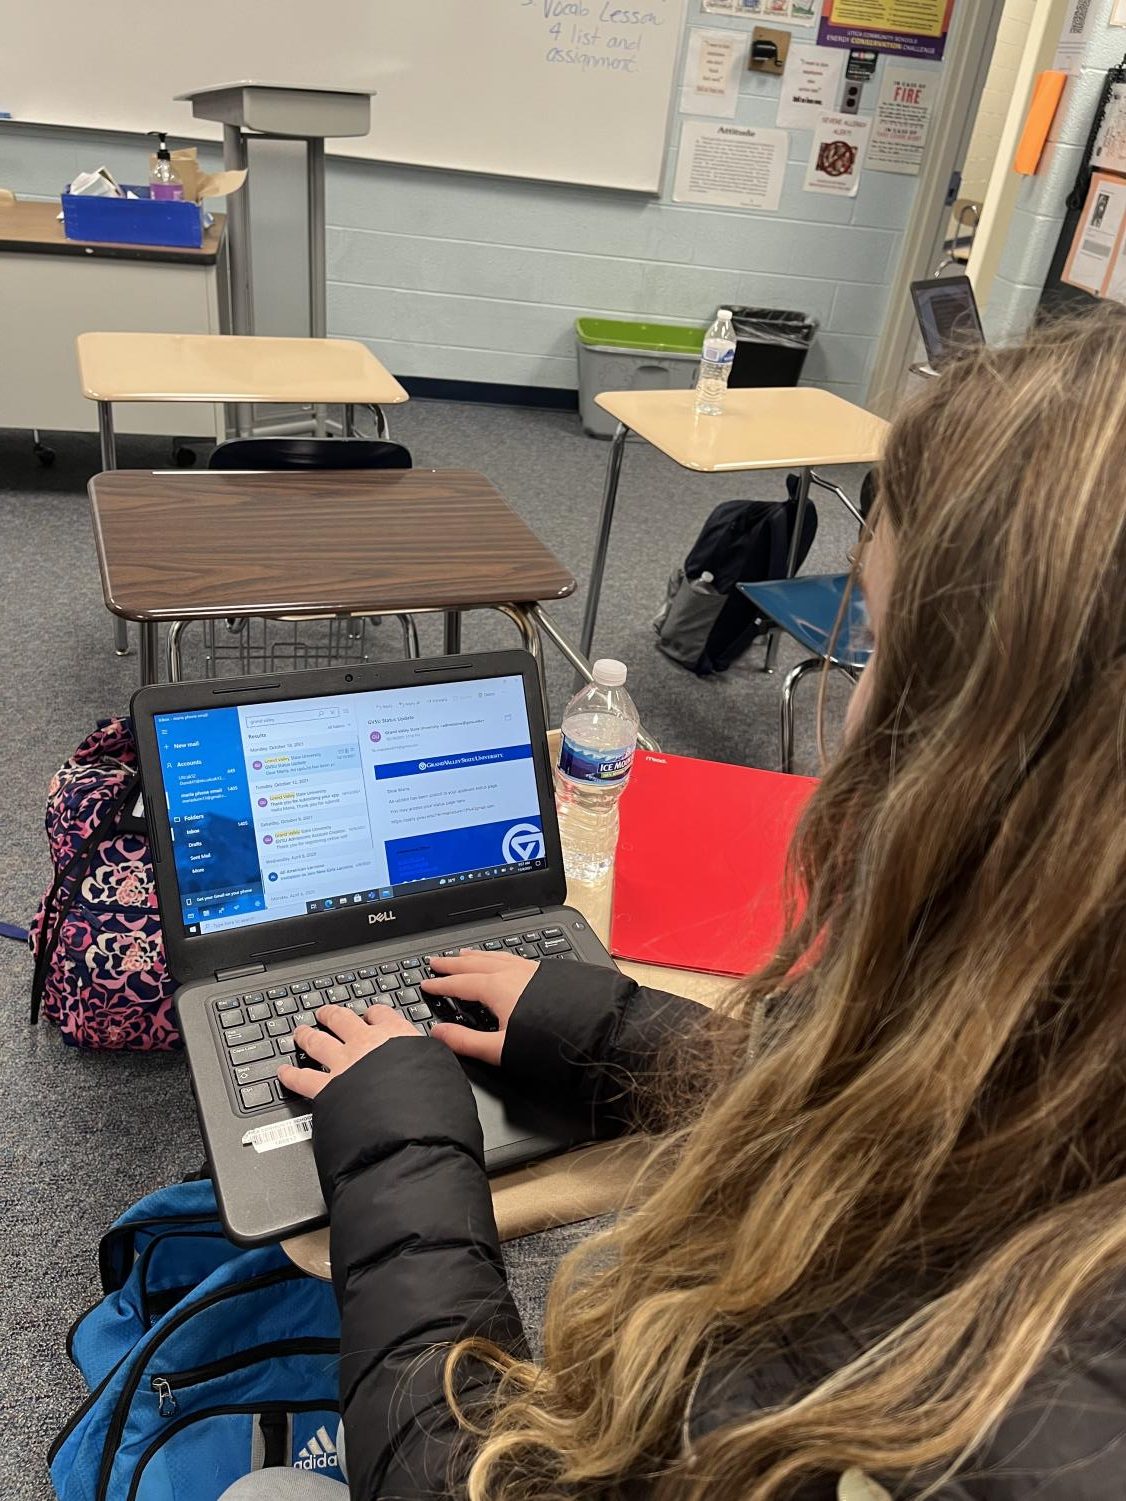 Senior Maria Dunn checks her email to hear her results from colleges. By applying early, she has received information from most of the colleges she applied to. “I feel so much better about the future knowing I have already got into some of the colleges I applied to,” she said.